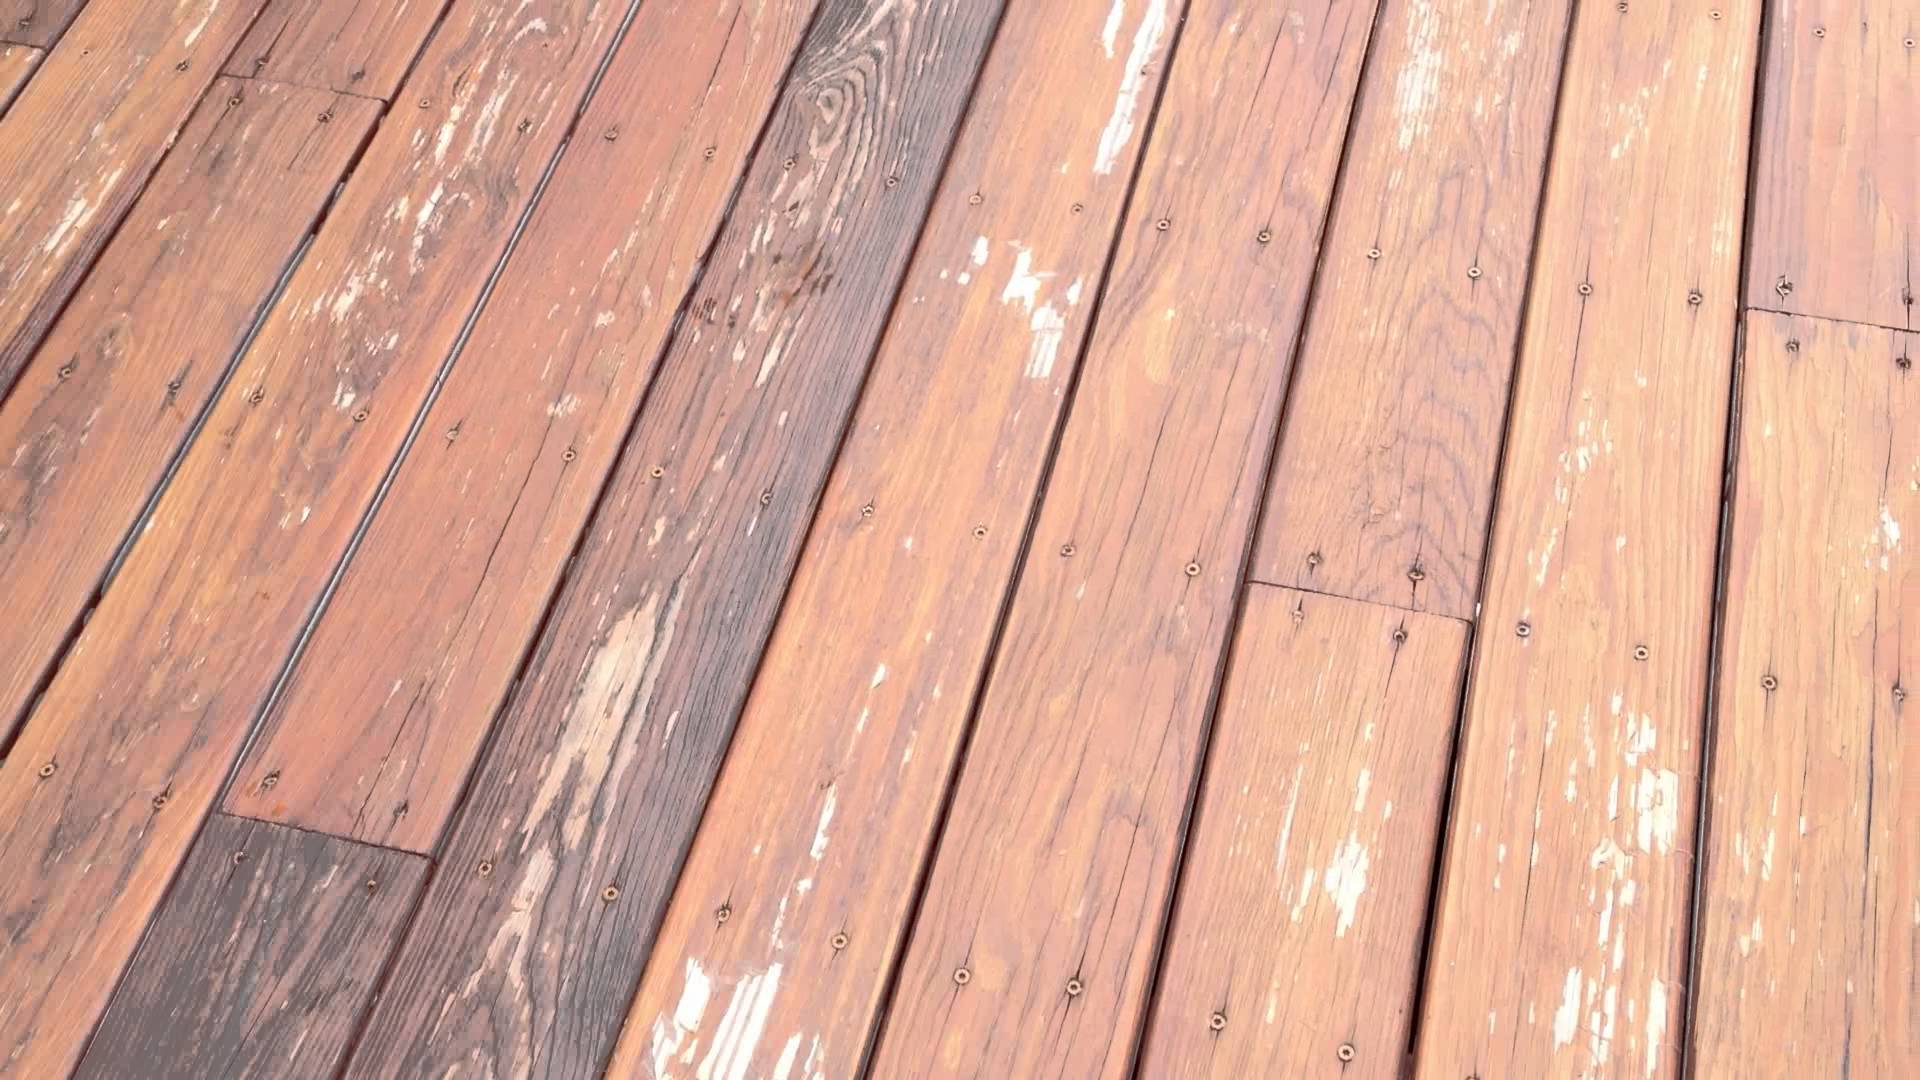 Decks Cool Performance Exterior Wood Using Defy Deck Stain with dimensions 1920 X 1080